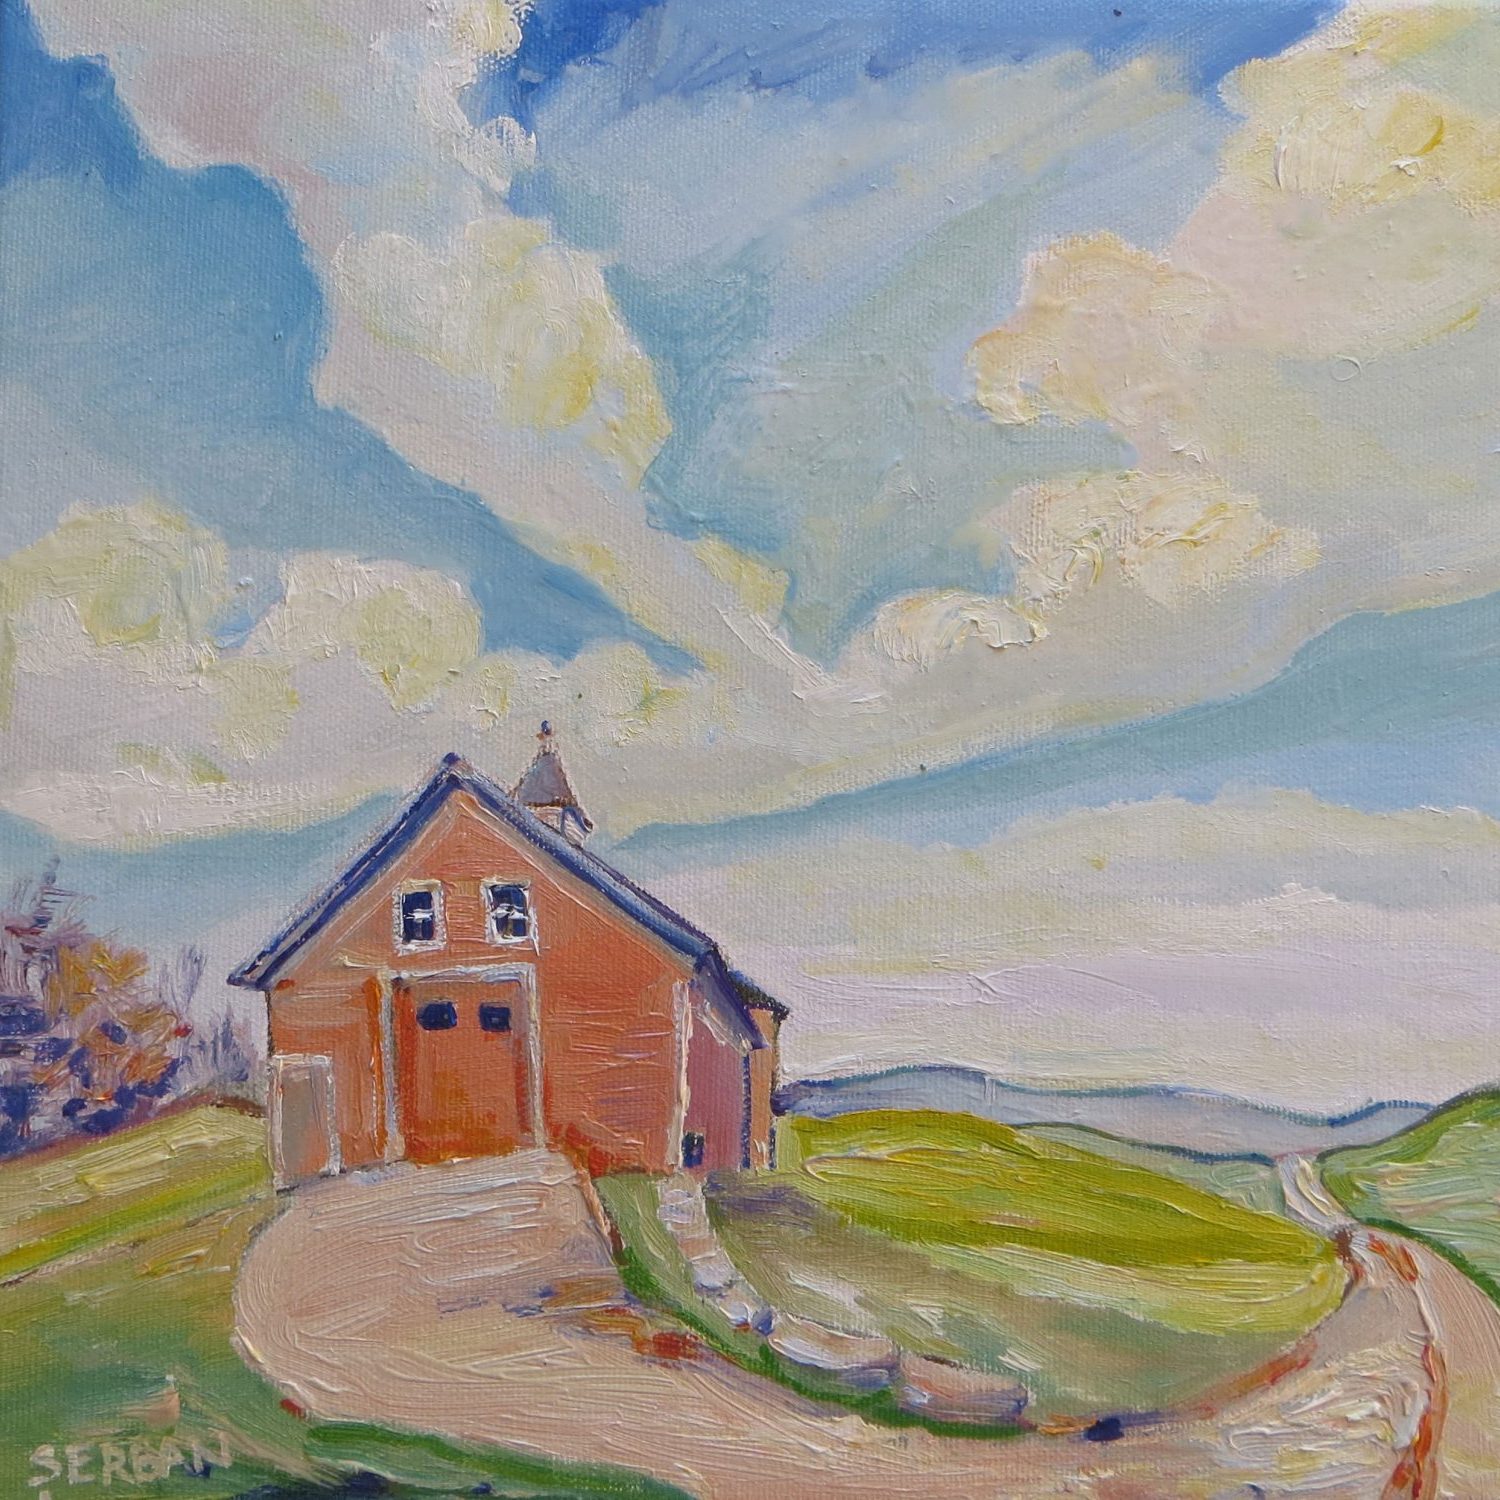 a painting of the Jacobson Barn at Storrs, UConn by artist Blanche Serban